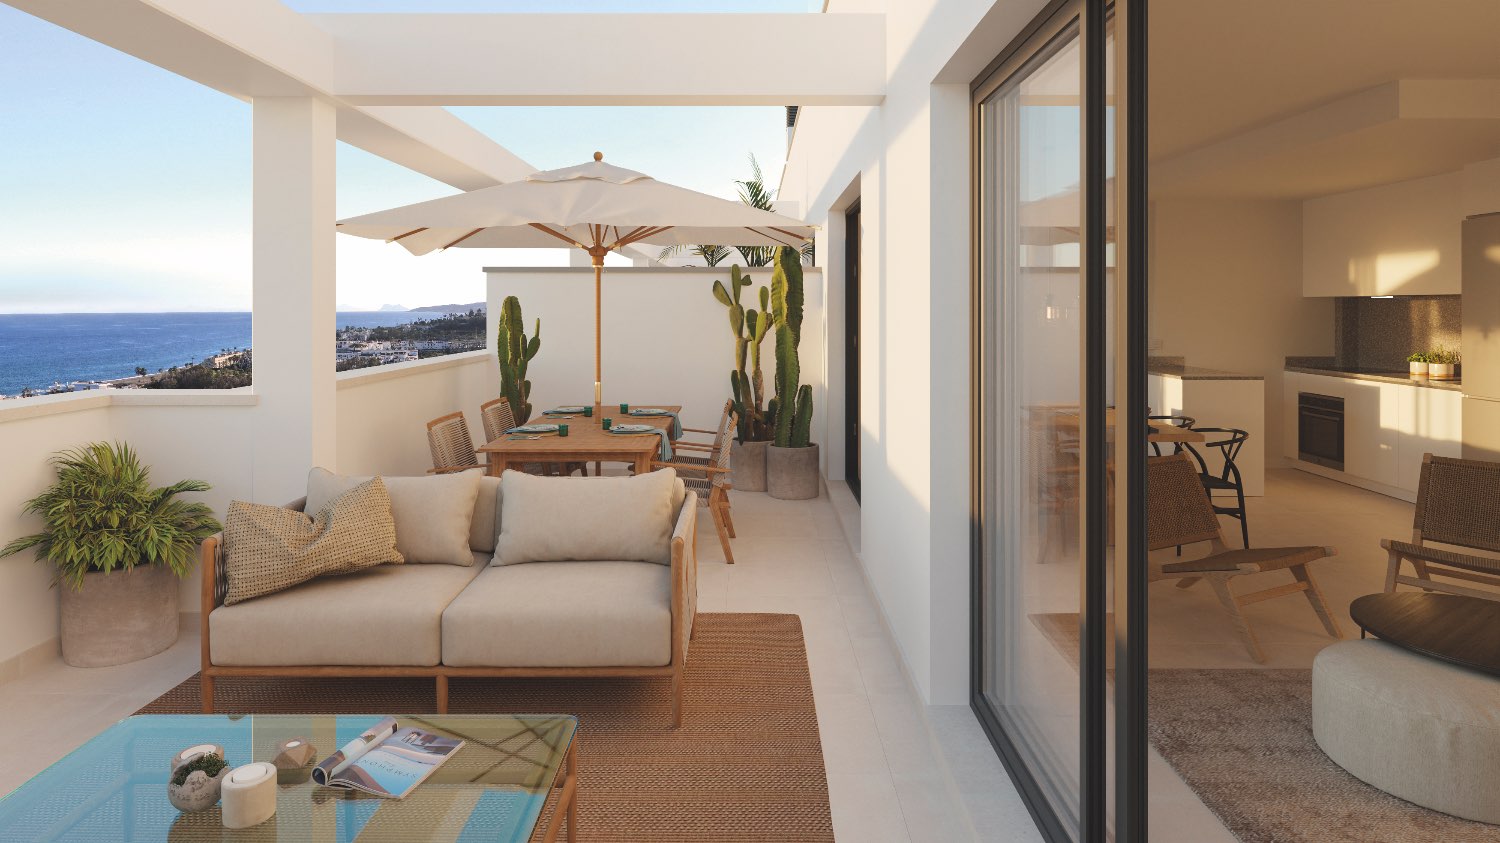 Two bedroom luxurious apartment in a new housing development in Estepona - Costa del Sol